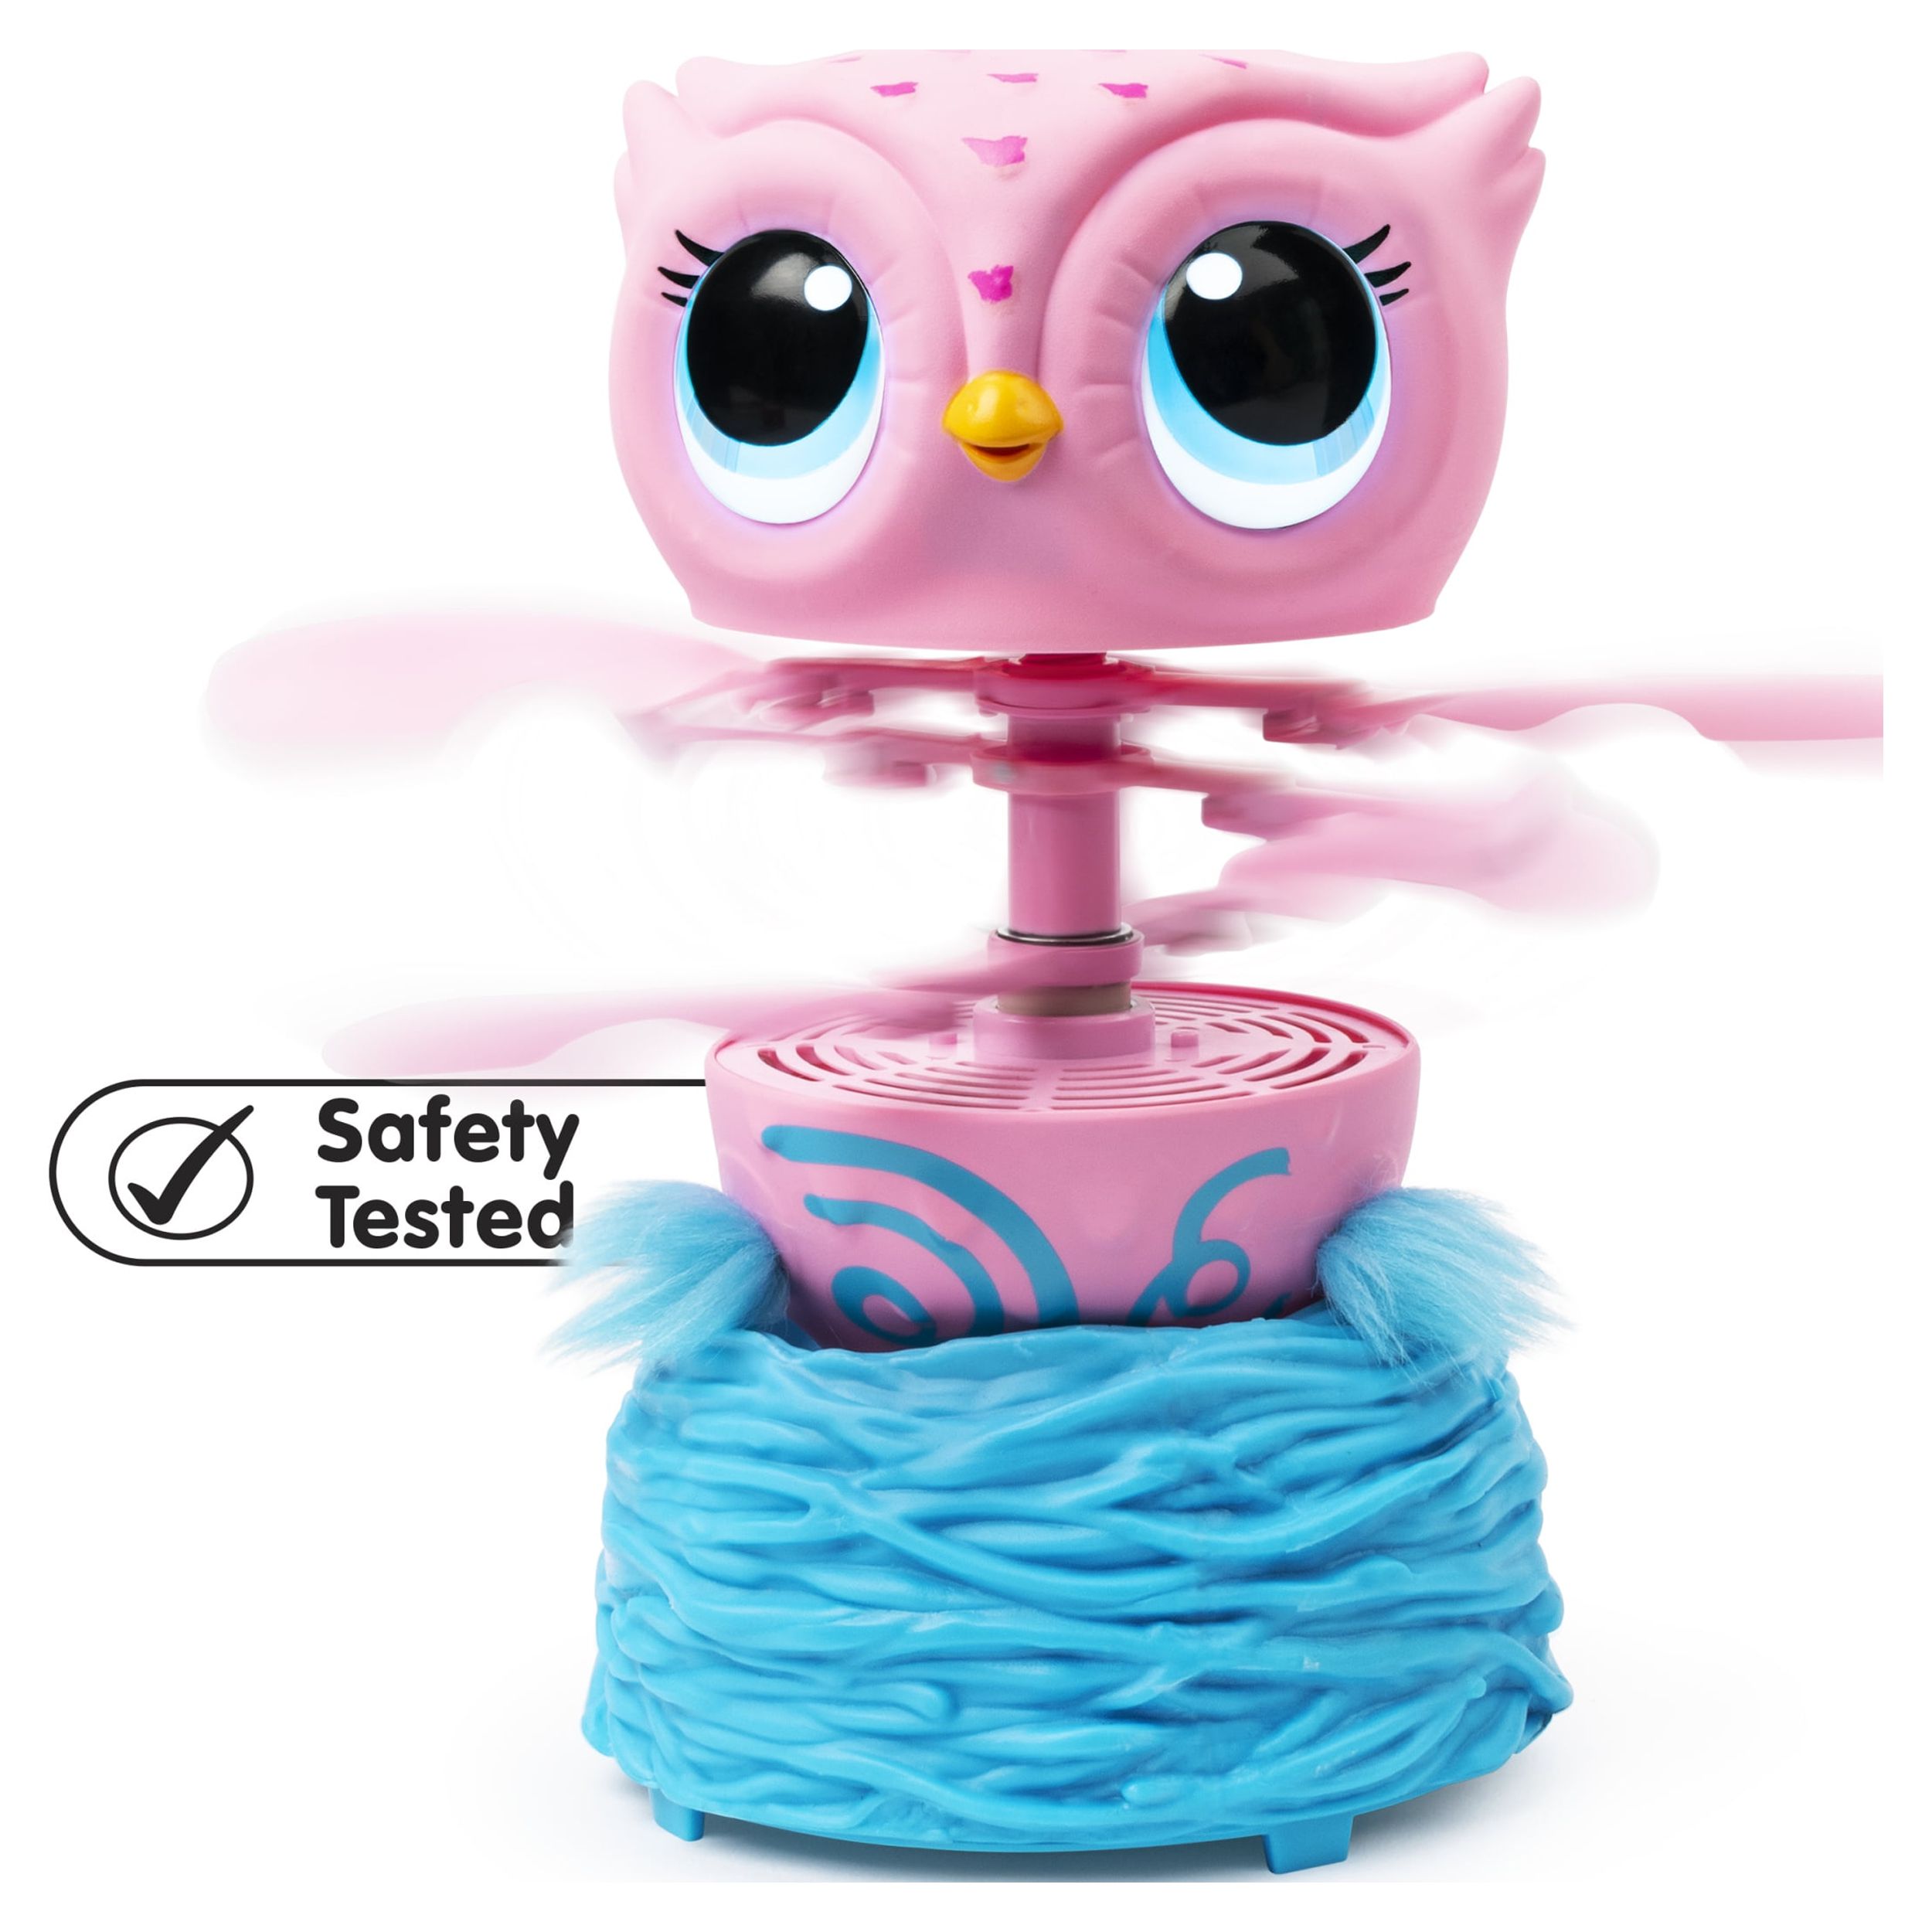 Owleez Flying Baby Owl Interactive Toy with Lights and Sounds (Pink) - image 5 of 8